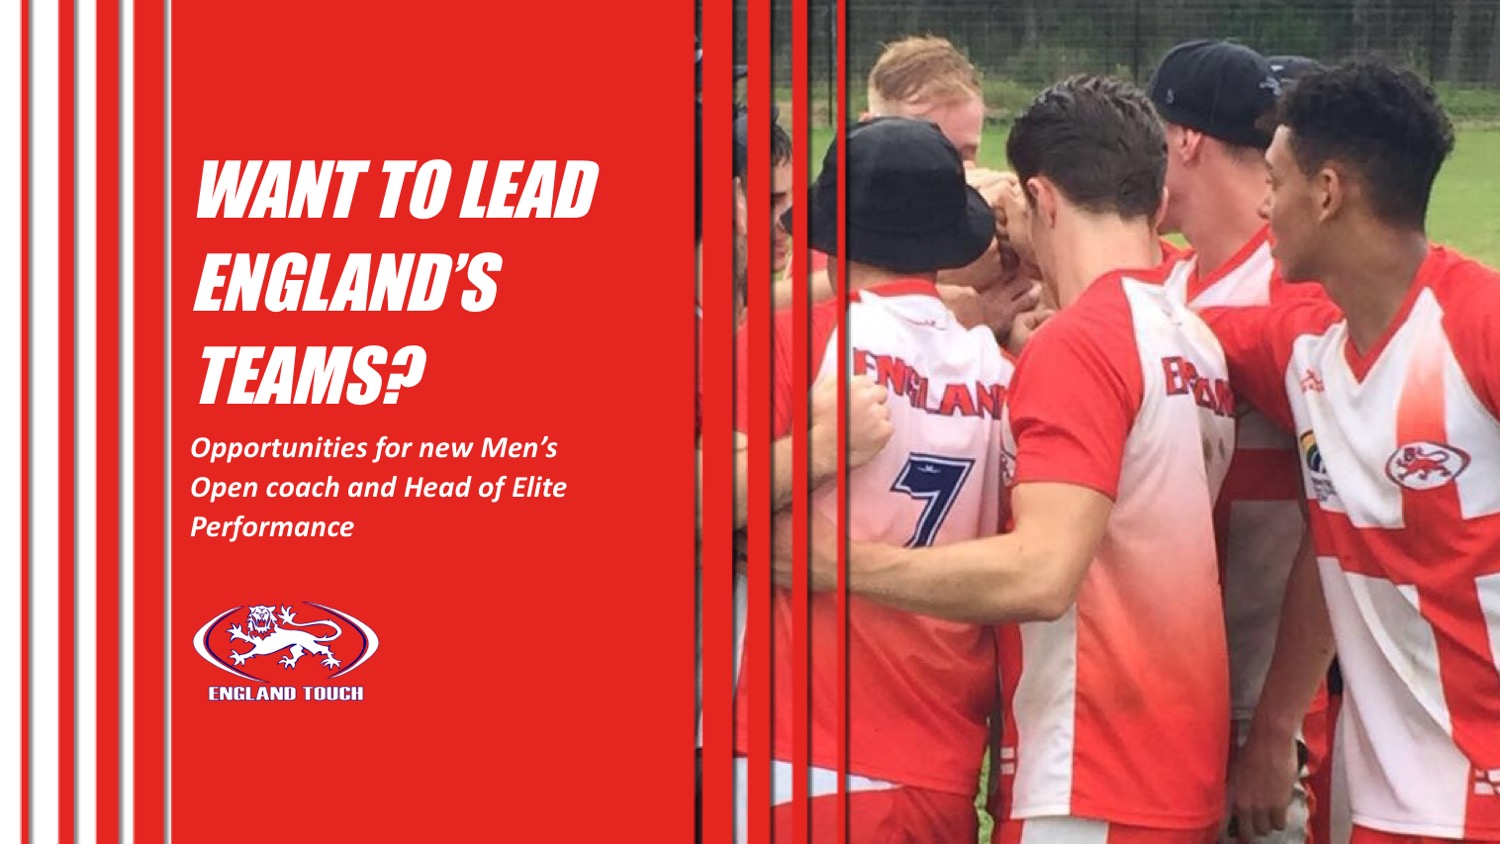 Help guide England Touch’s elite teams